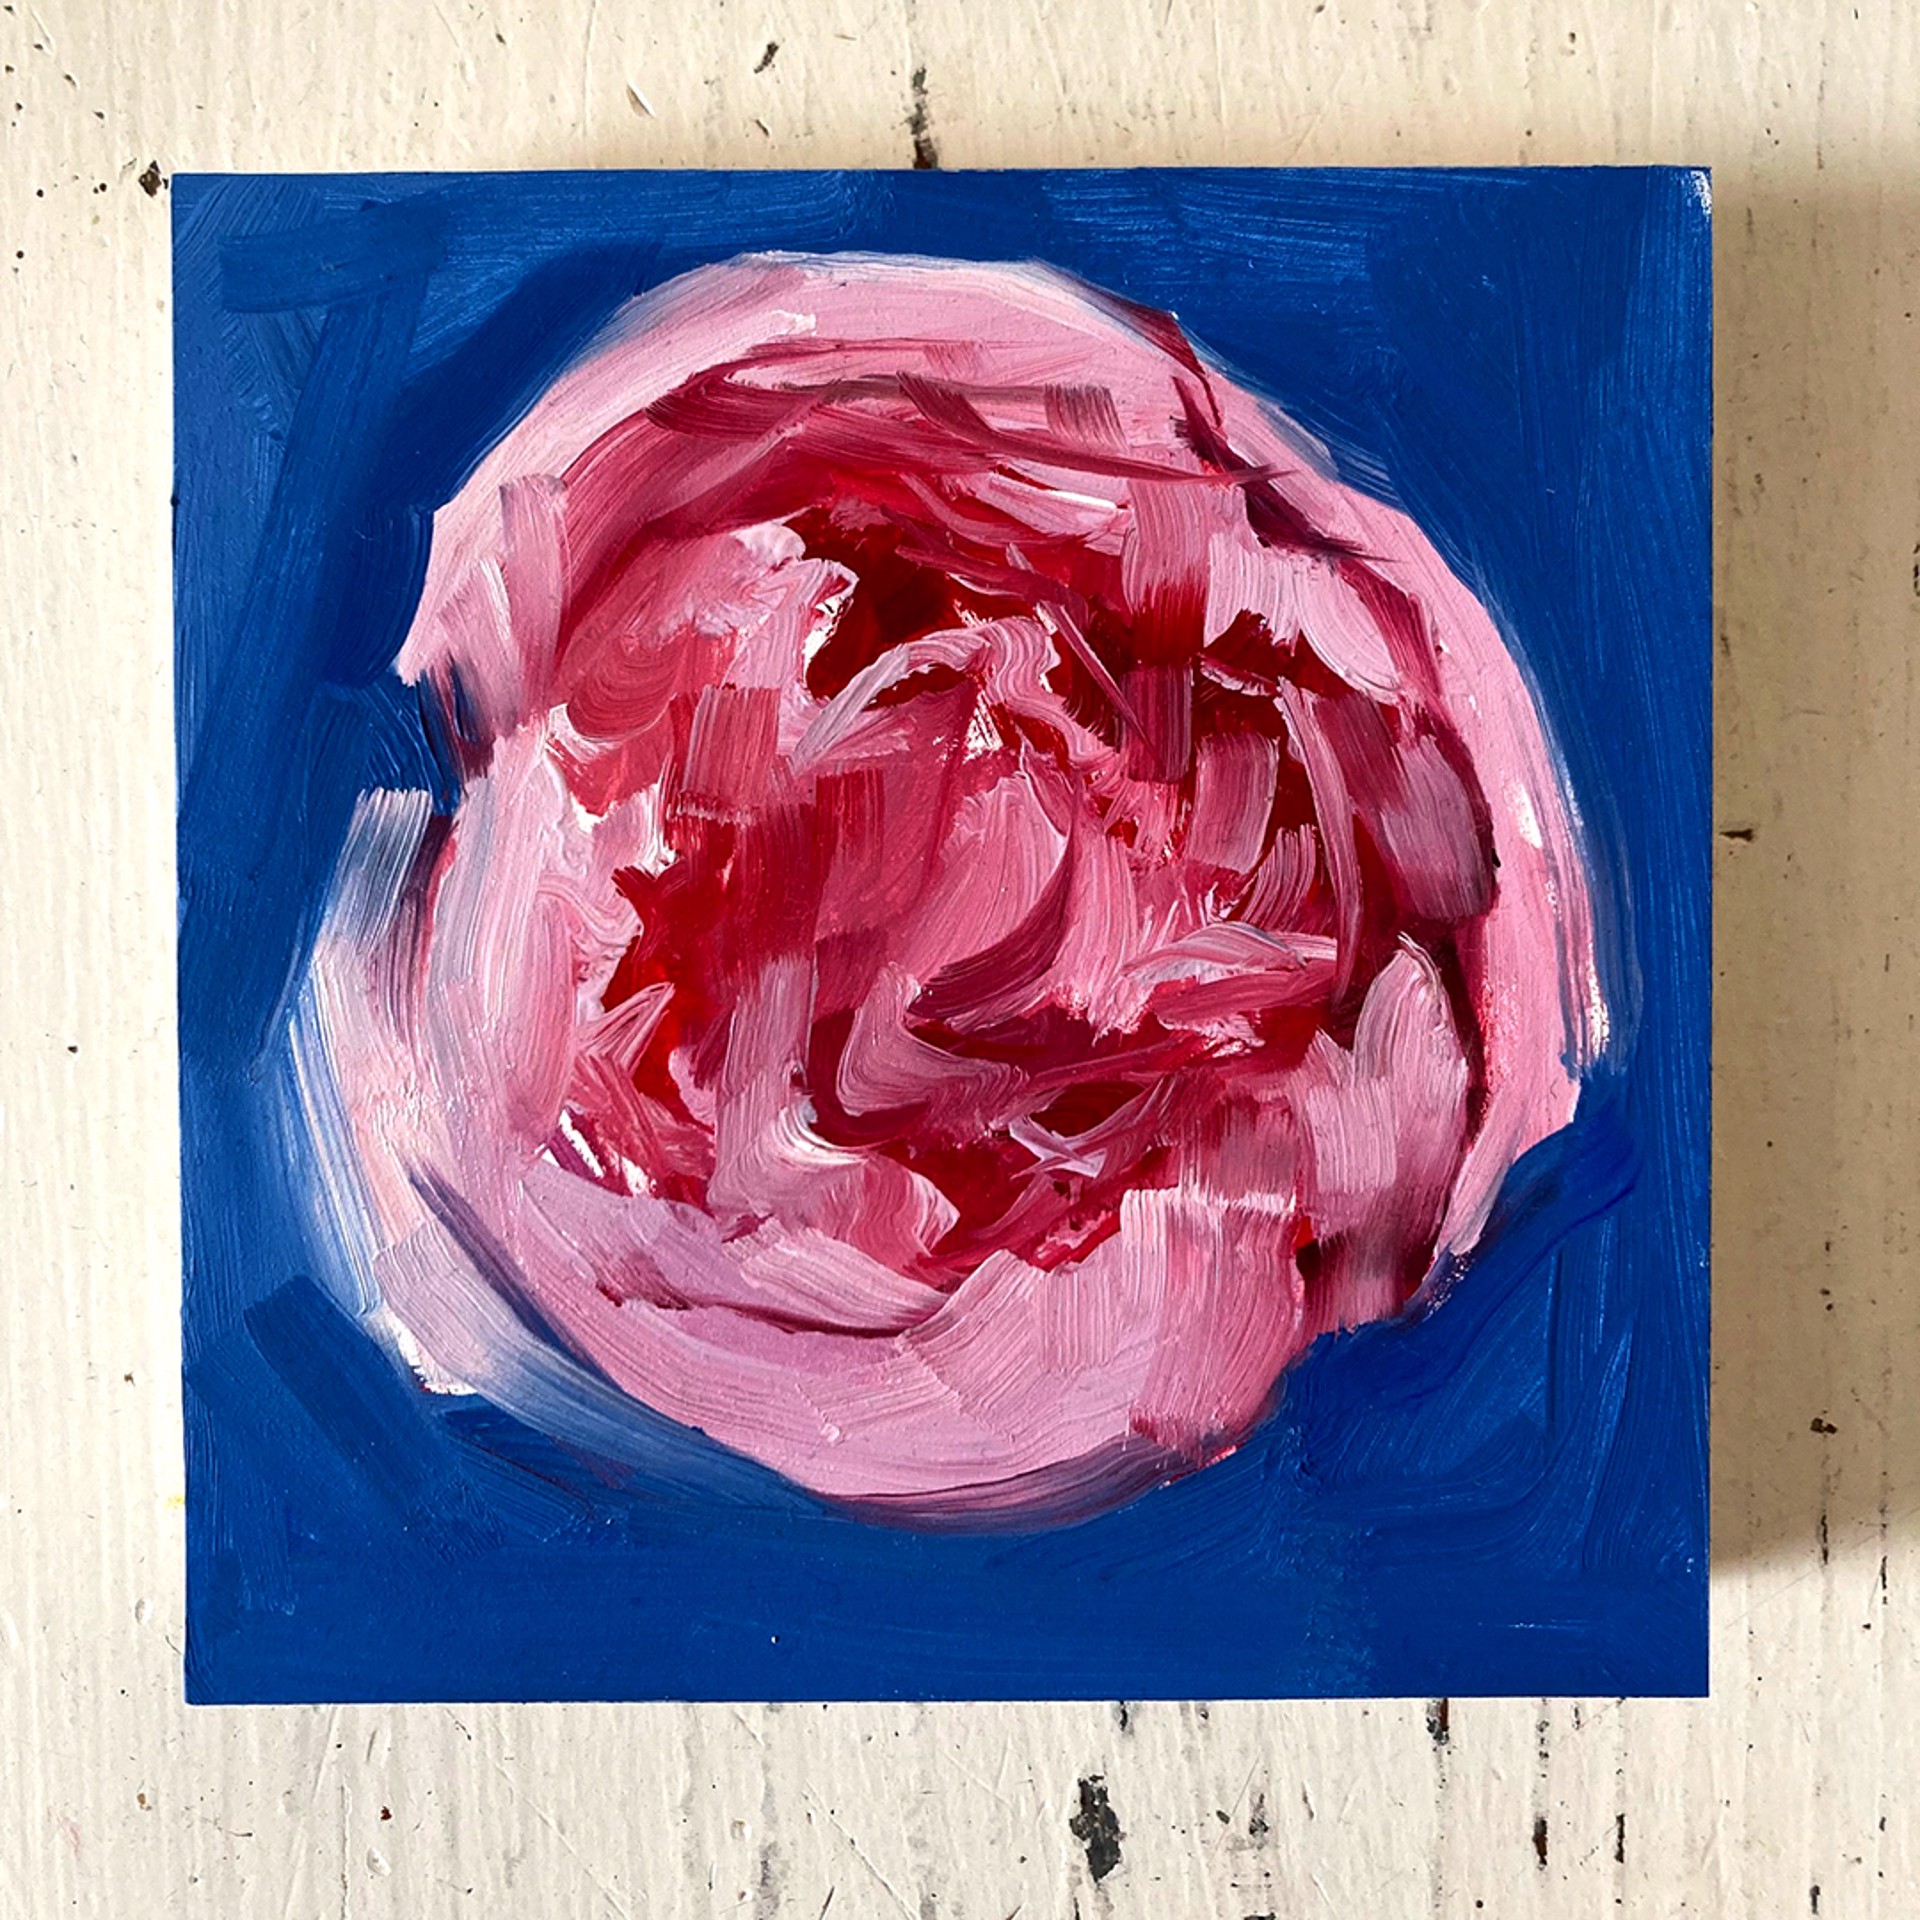 Peony Project #6 by Amy R. Peterson*